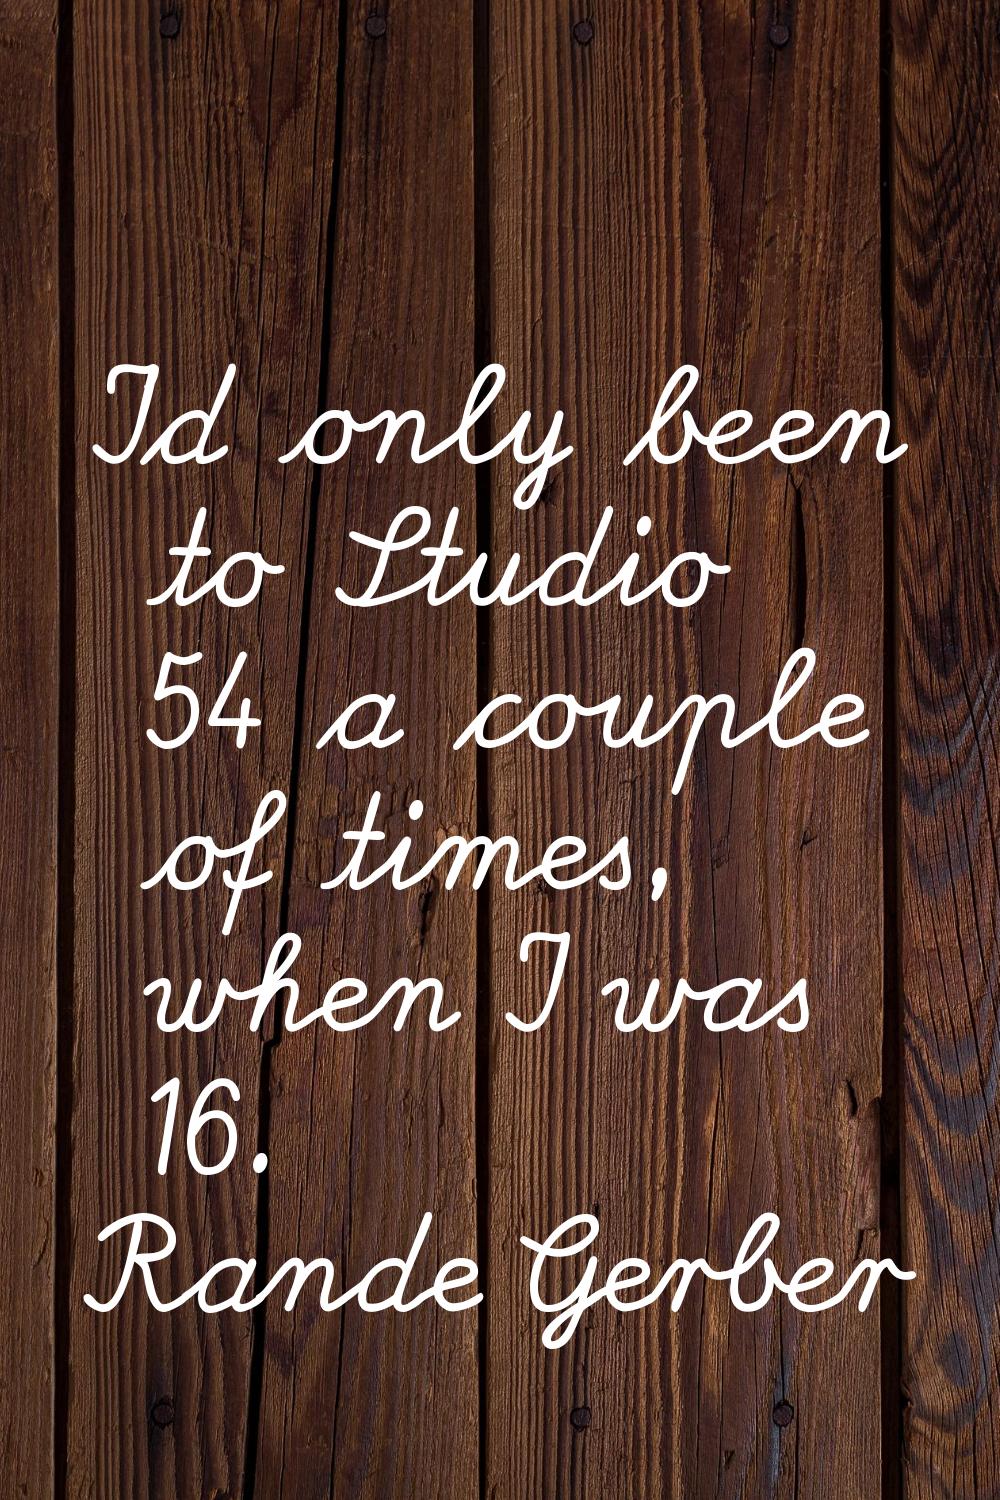 I'd only been to Studio 54 a couple of times, when I was 16.